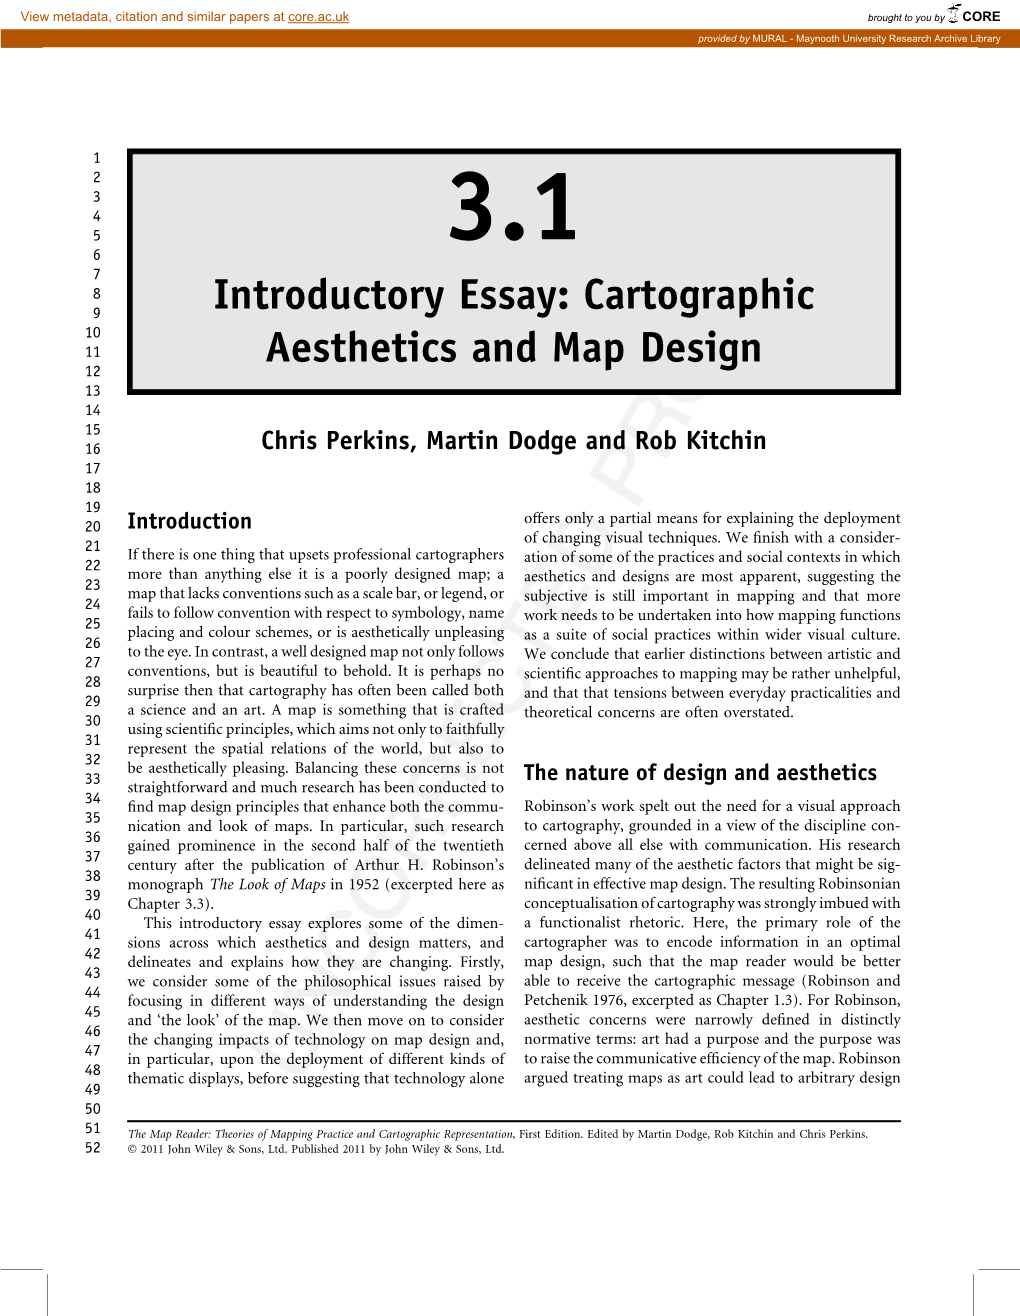 Introductory Essay: Cartographic Aesthetics and Map Design